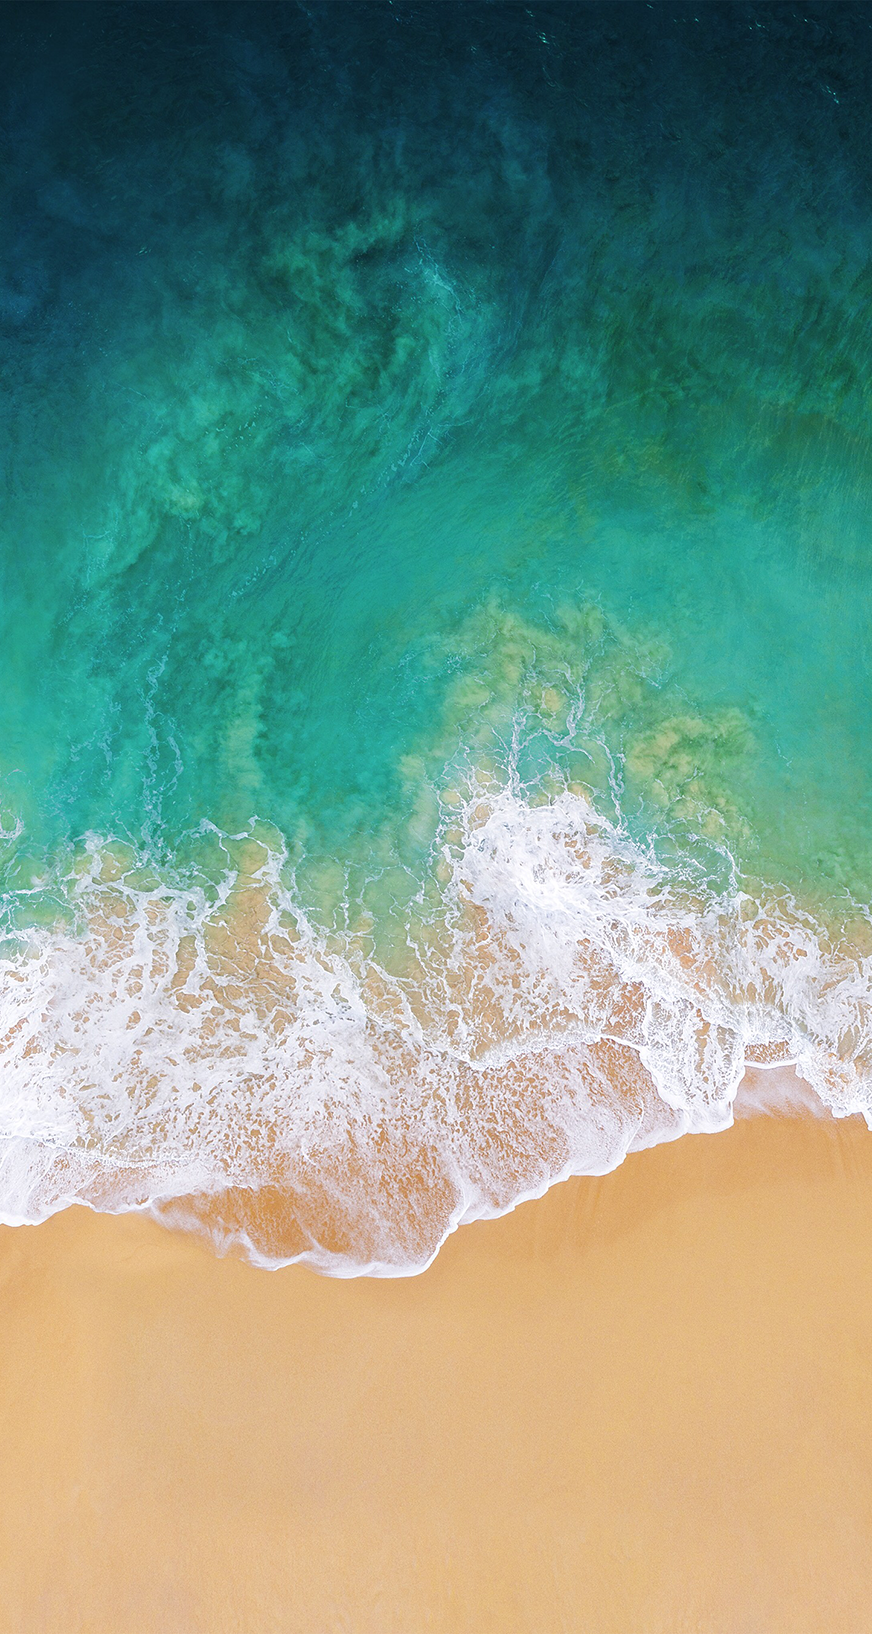 Download the Real iOS 12 Wallpaper for iPhone - iClarified